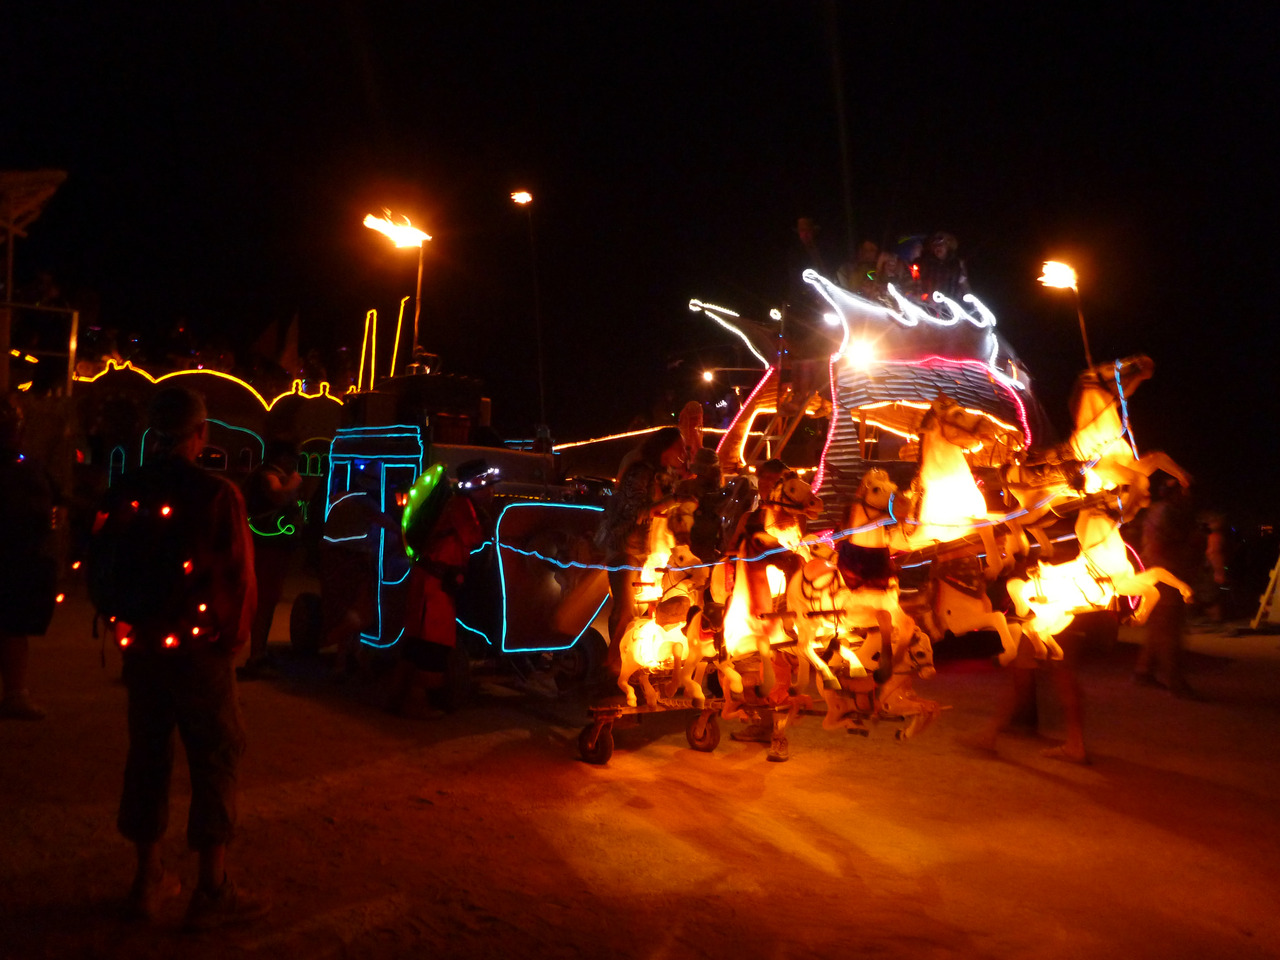 the art cars at burning man were so beautiful and creative…